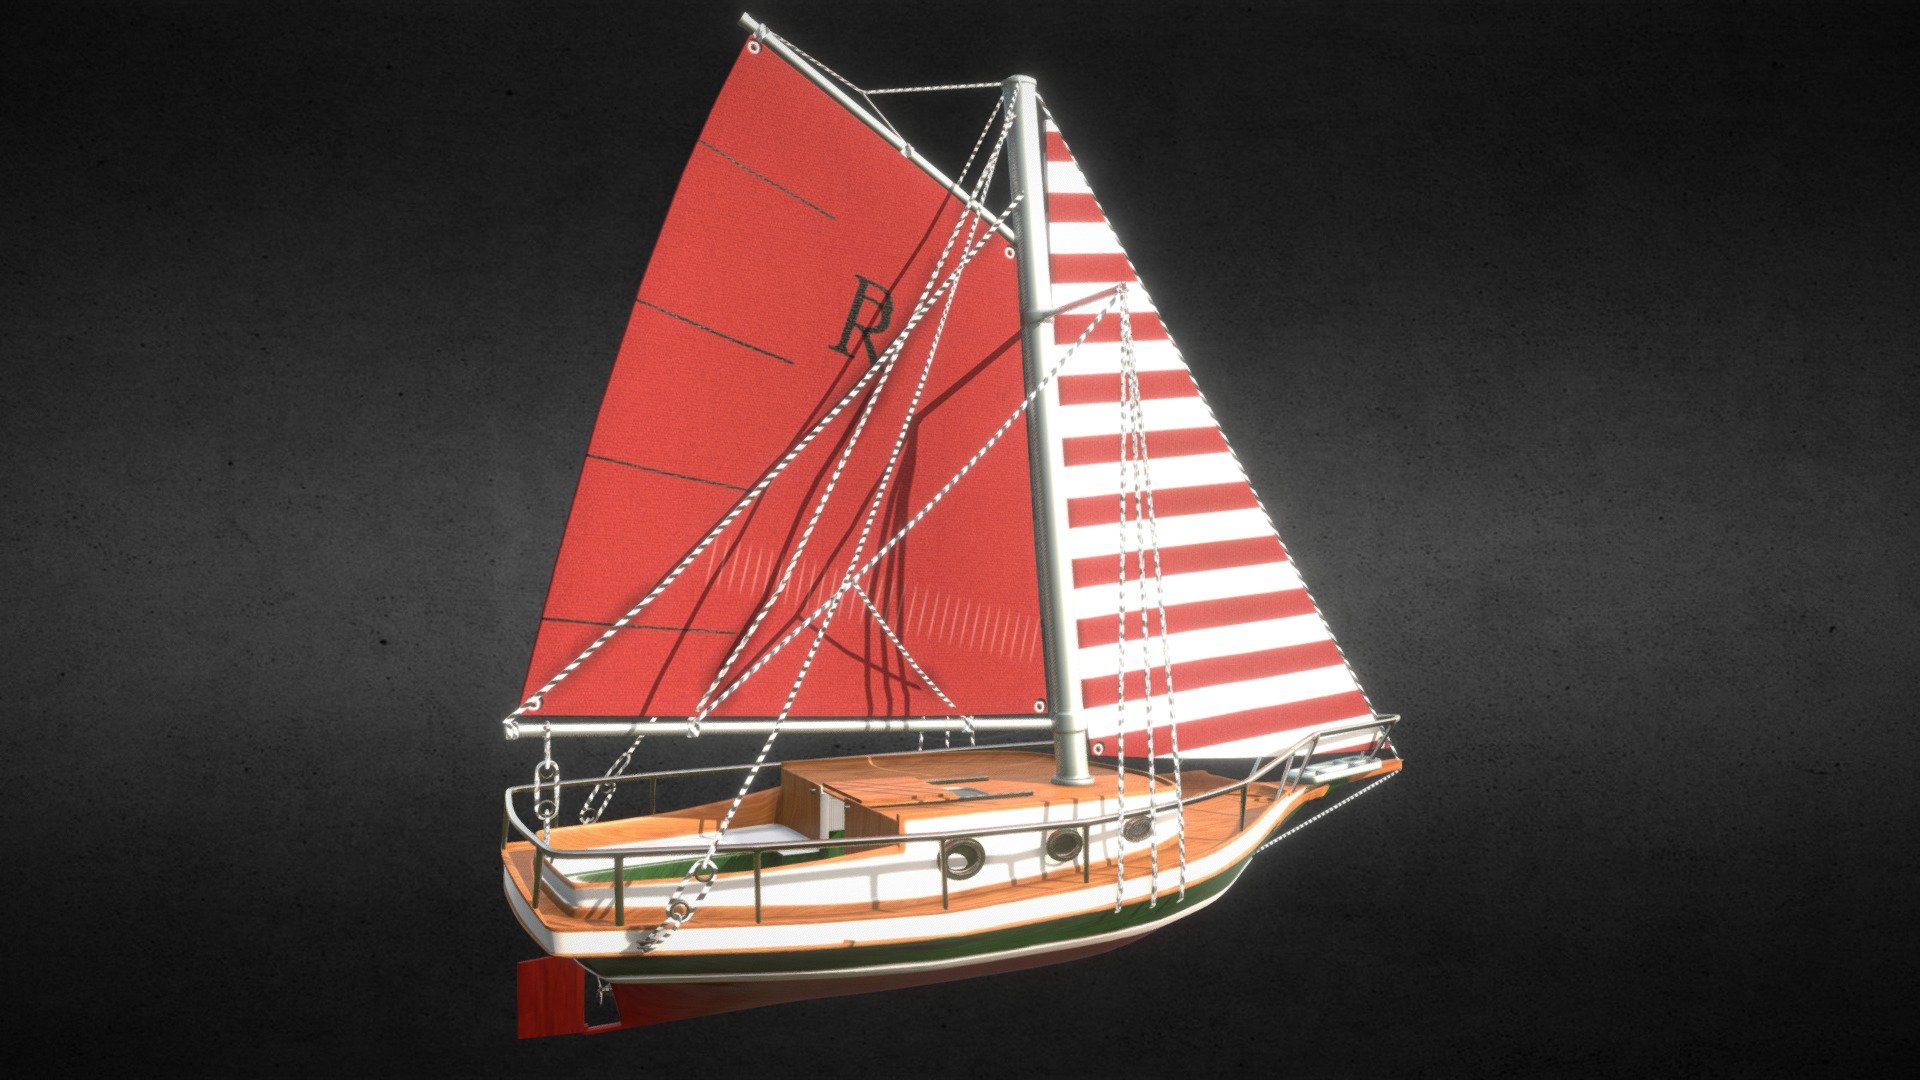 A sport sail boat to make a film or incluid in a videogame. I designed it in 3 FODs for videogames.

The price has included 3 FOD models with textures.

https://www.linkedin.com/in/waltherd/ - Sail Boat - Buy Royalty Free 3D model by Walther D (@WaltherD) 3d model